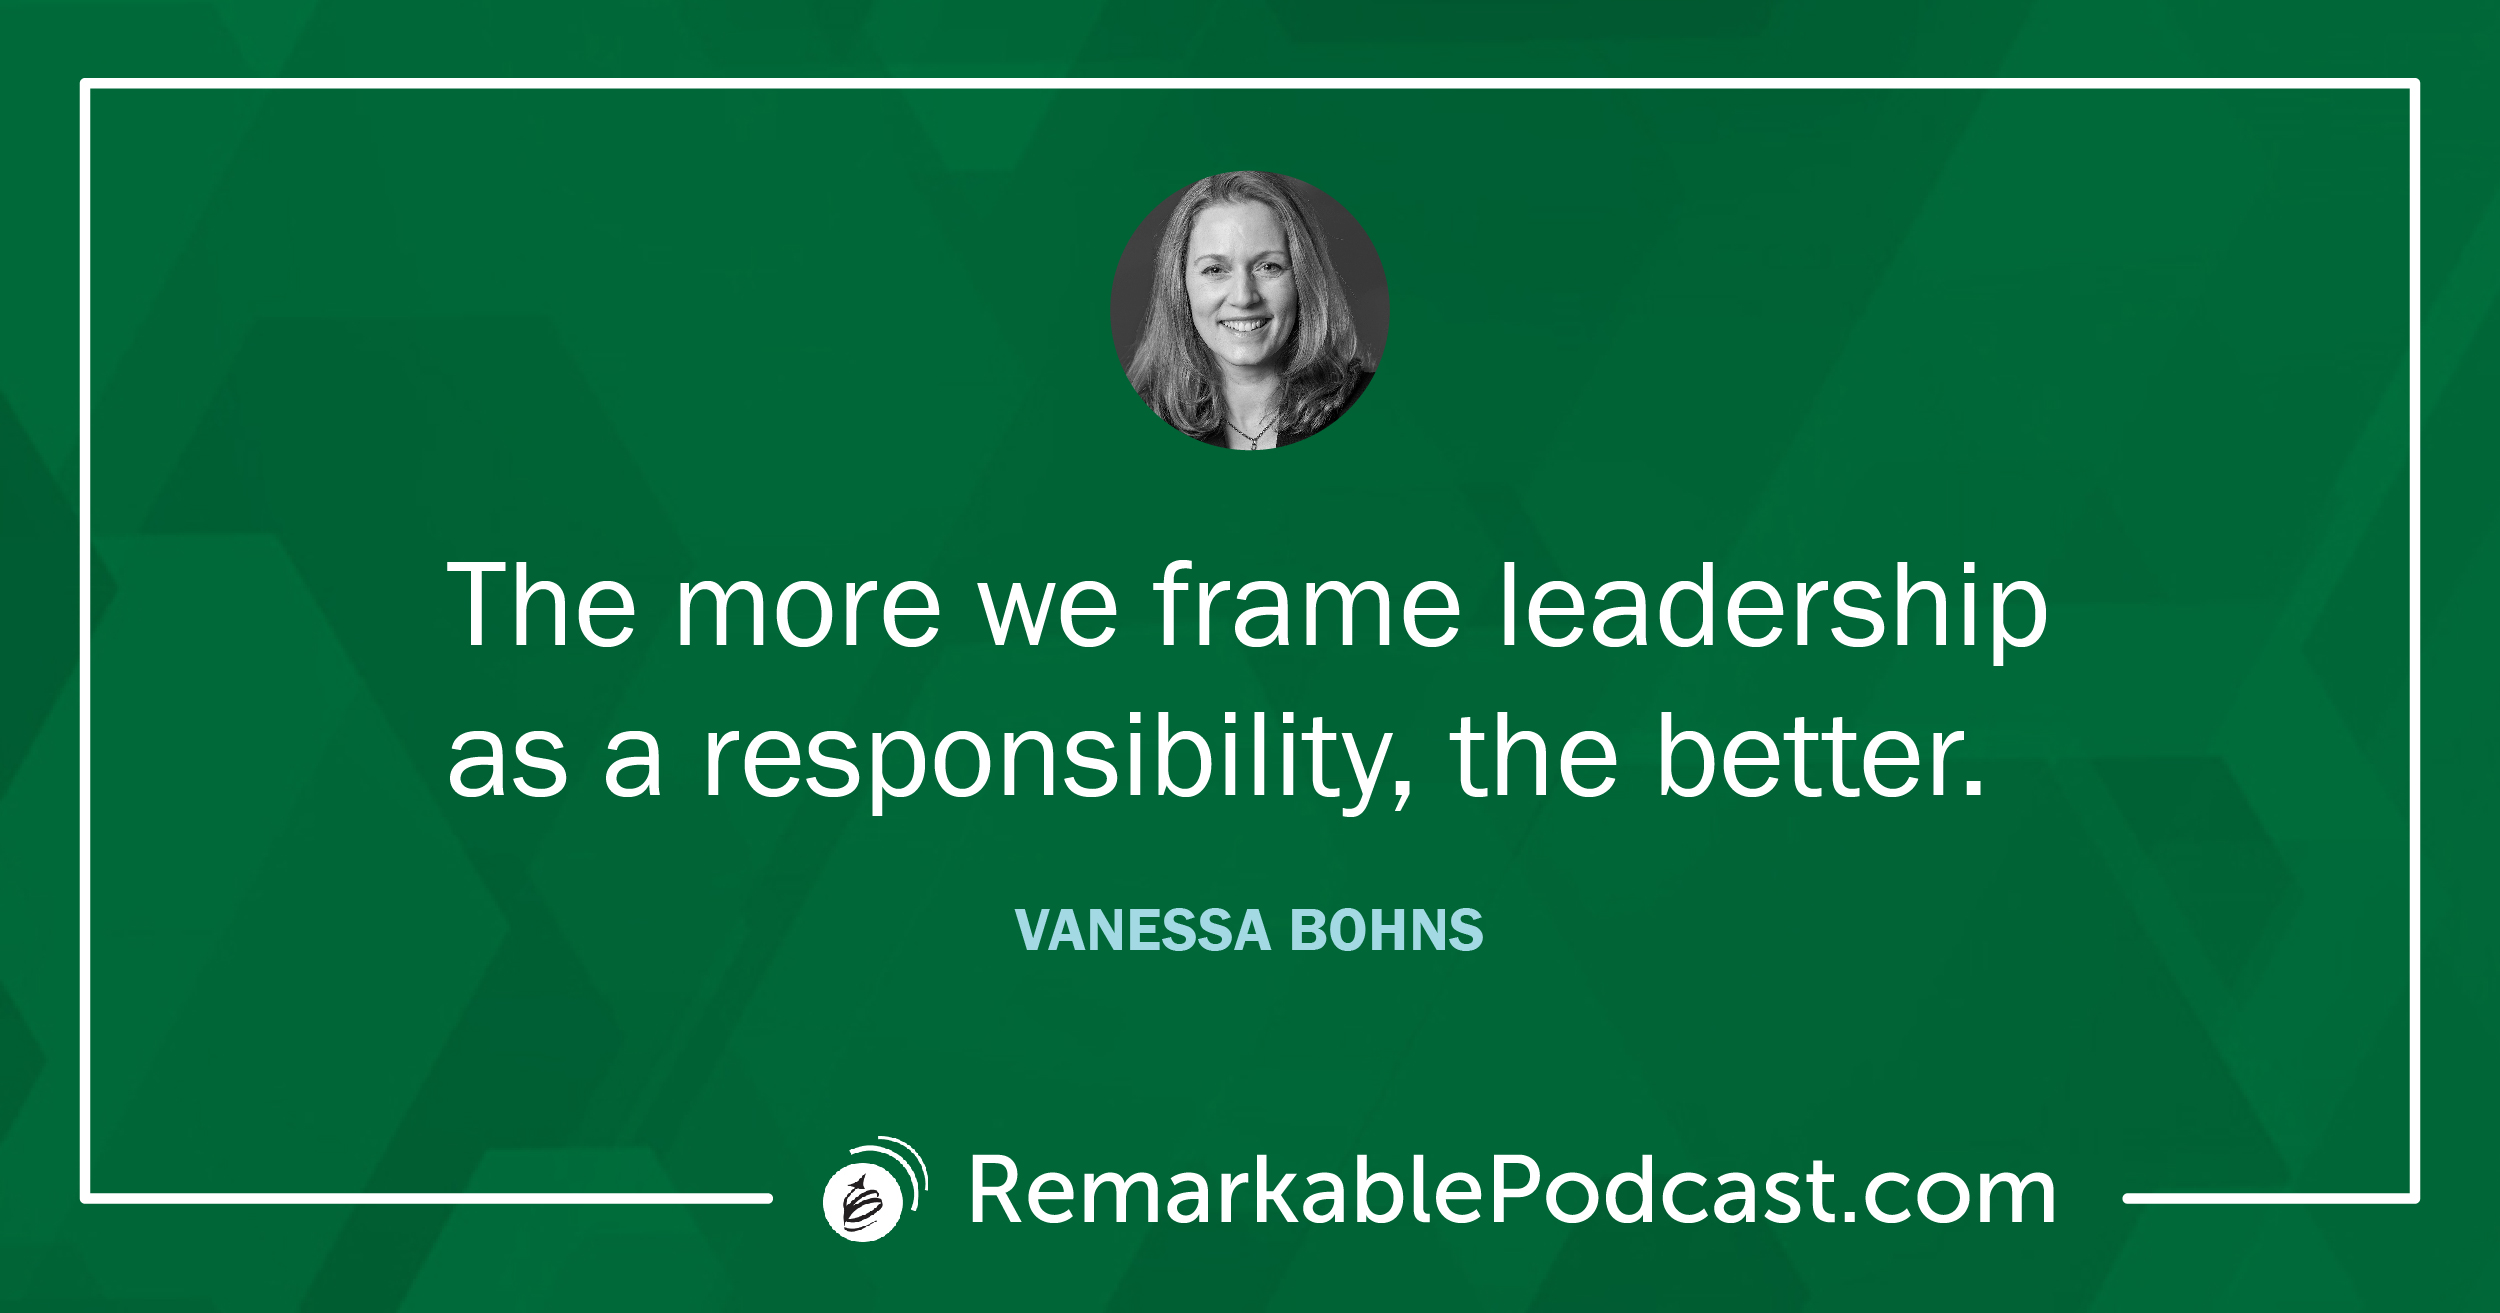 Quote Image: The more we frame leadership as a responsibility, the better. Said by Vanessa Bohns